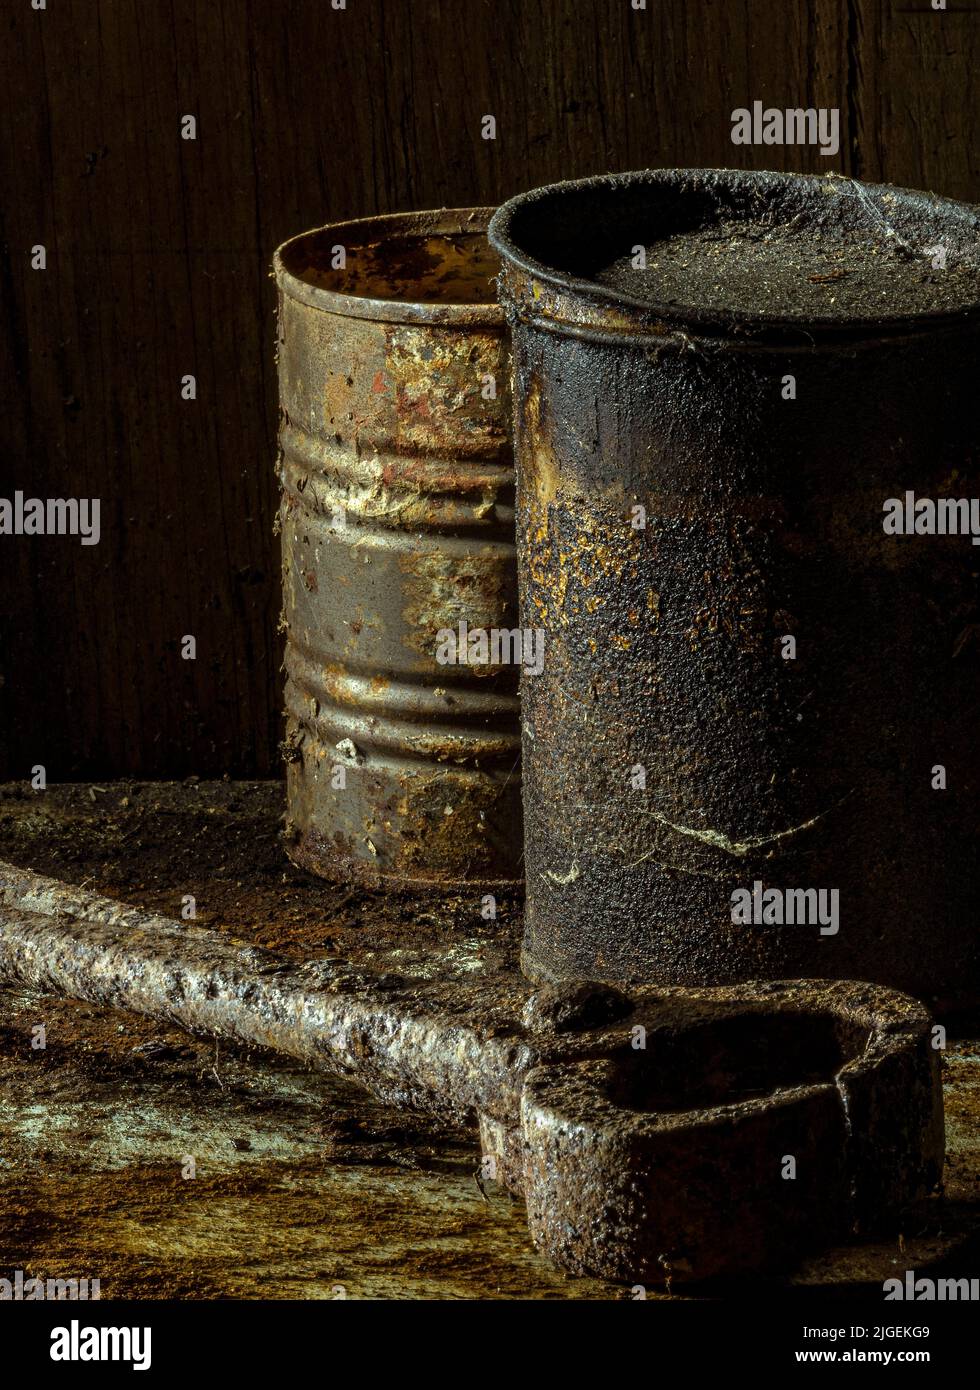 Artistic rusty metal cans Stock Photo